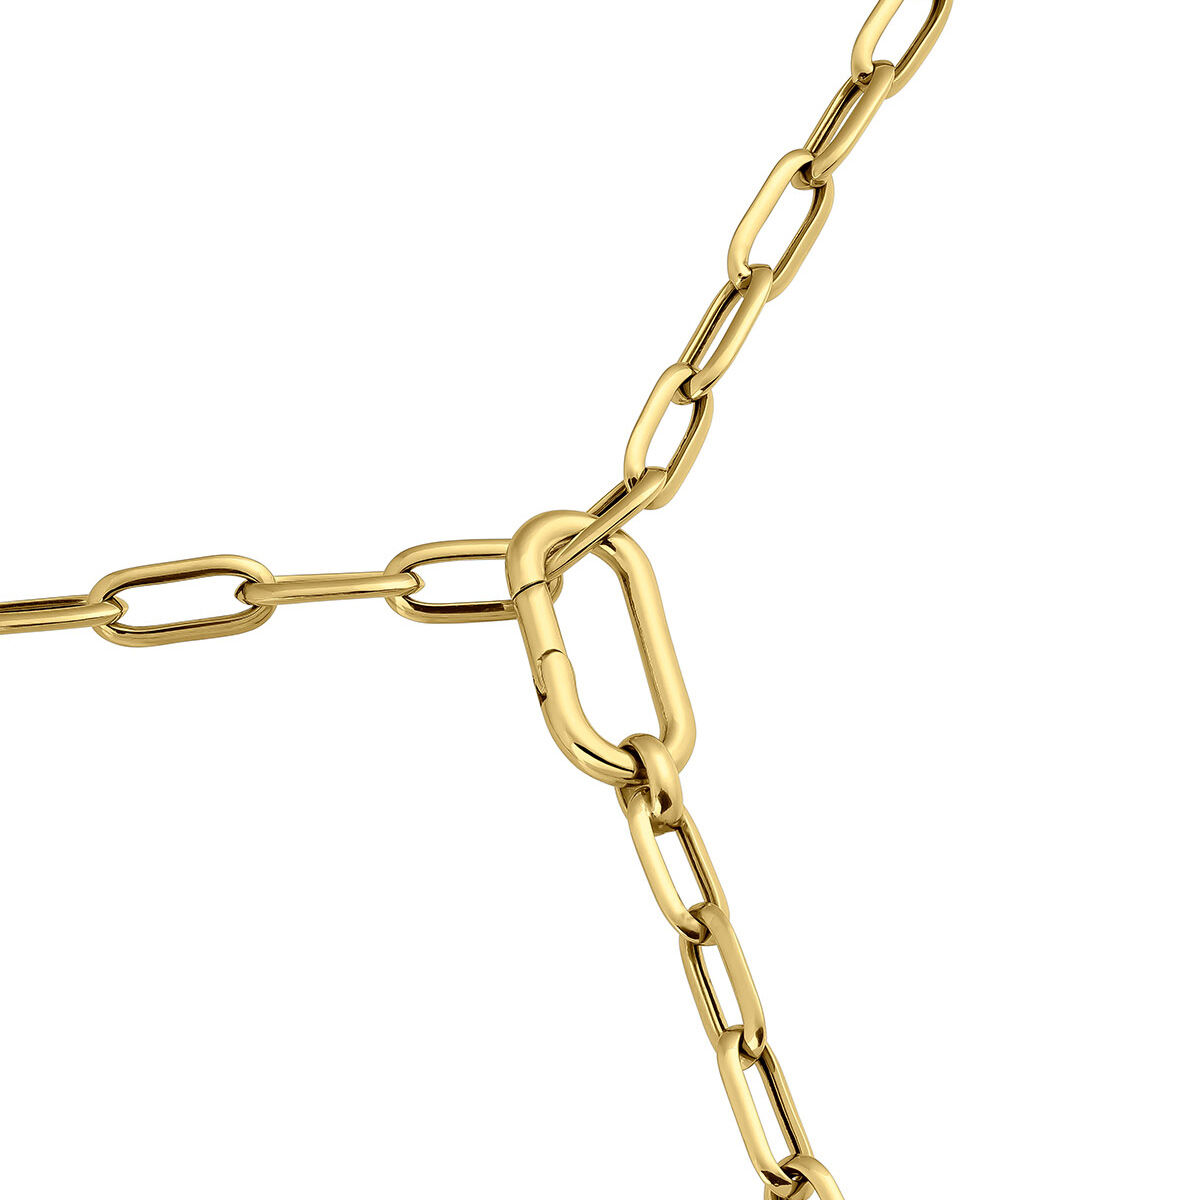 Rectangular cable link chain in 18k yellow gold-plated silver, J05340-02-45, hi-res